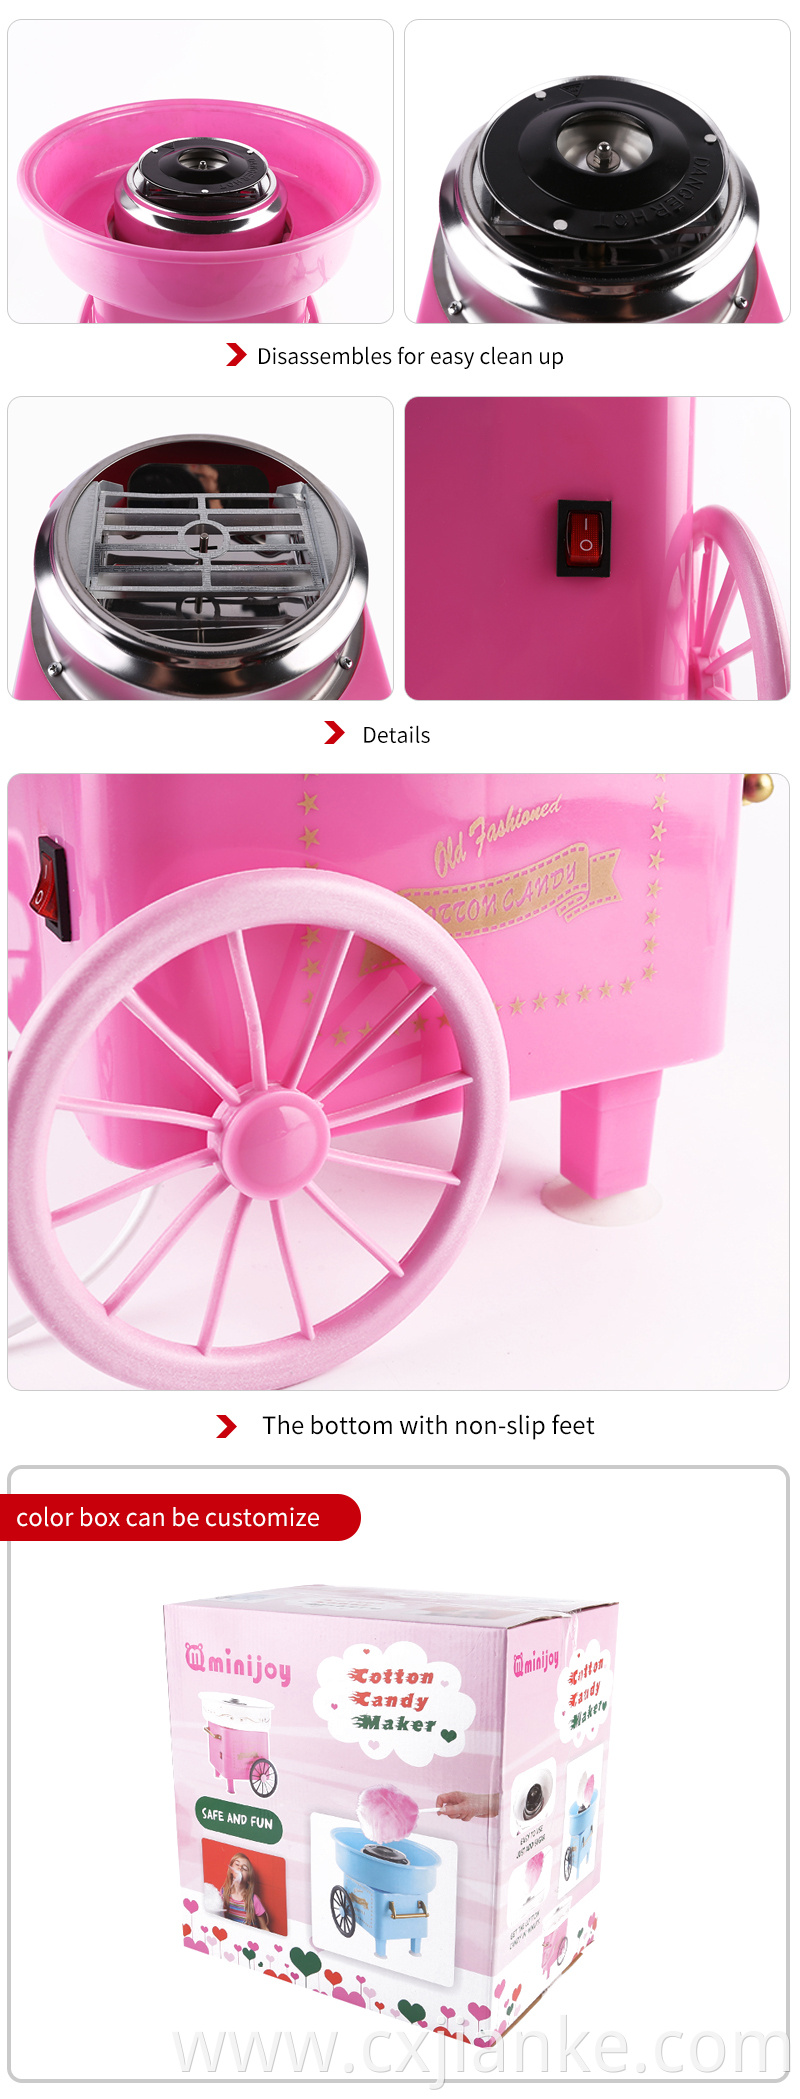 hot sale modern home commercial cotton candy floss machine